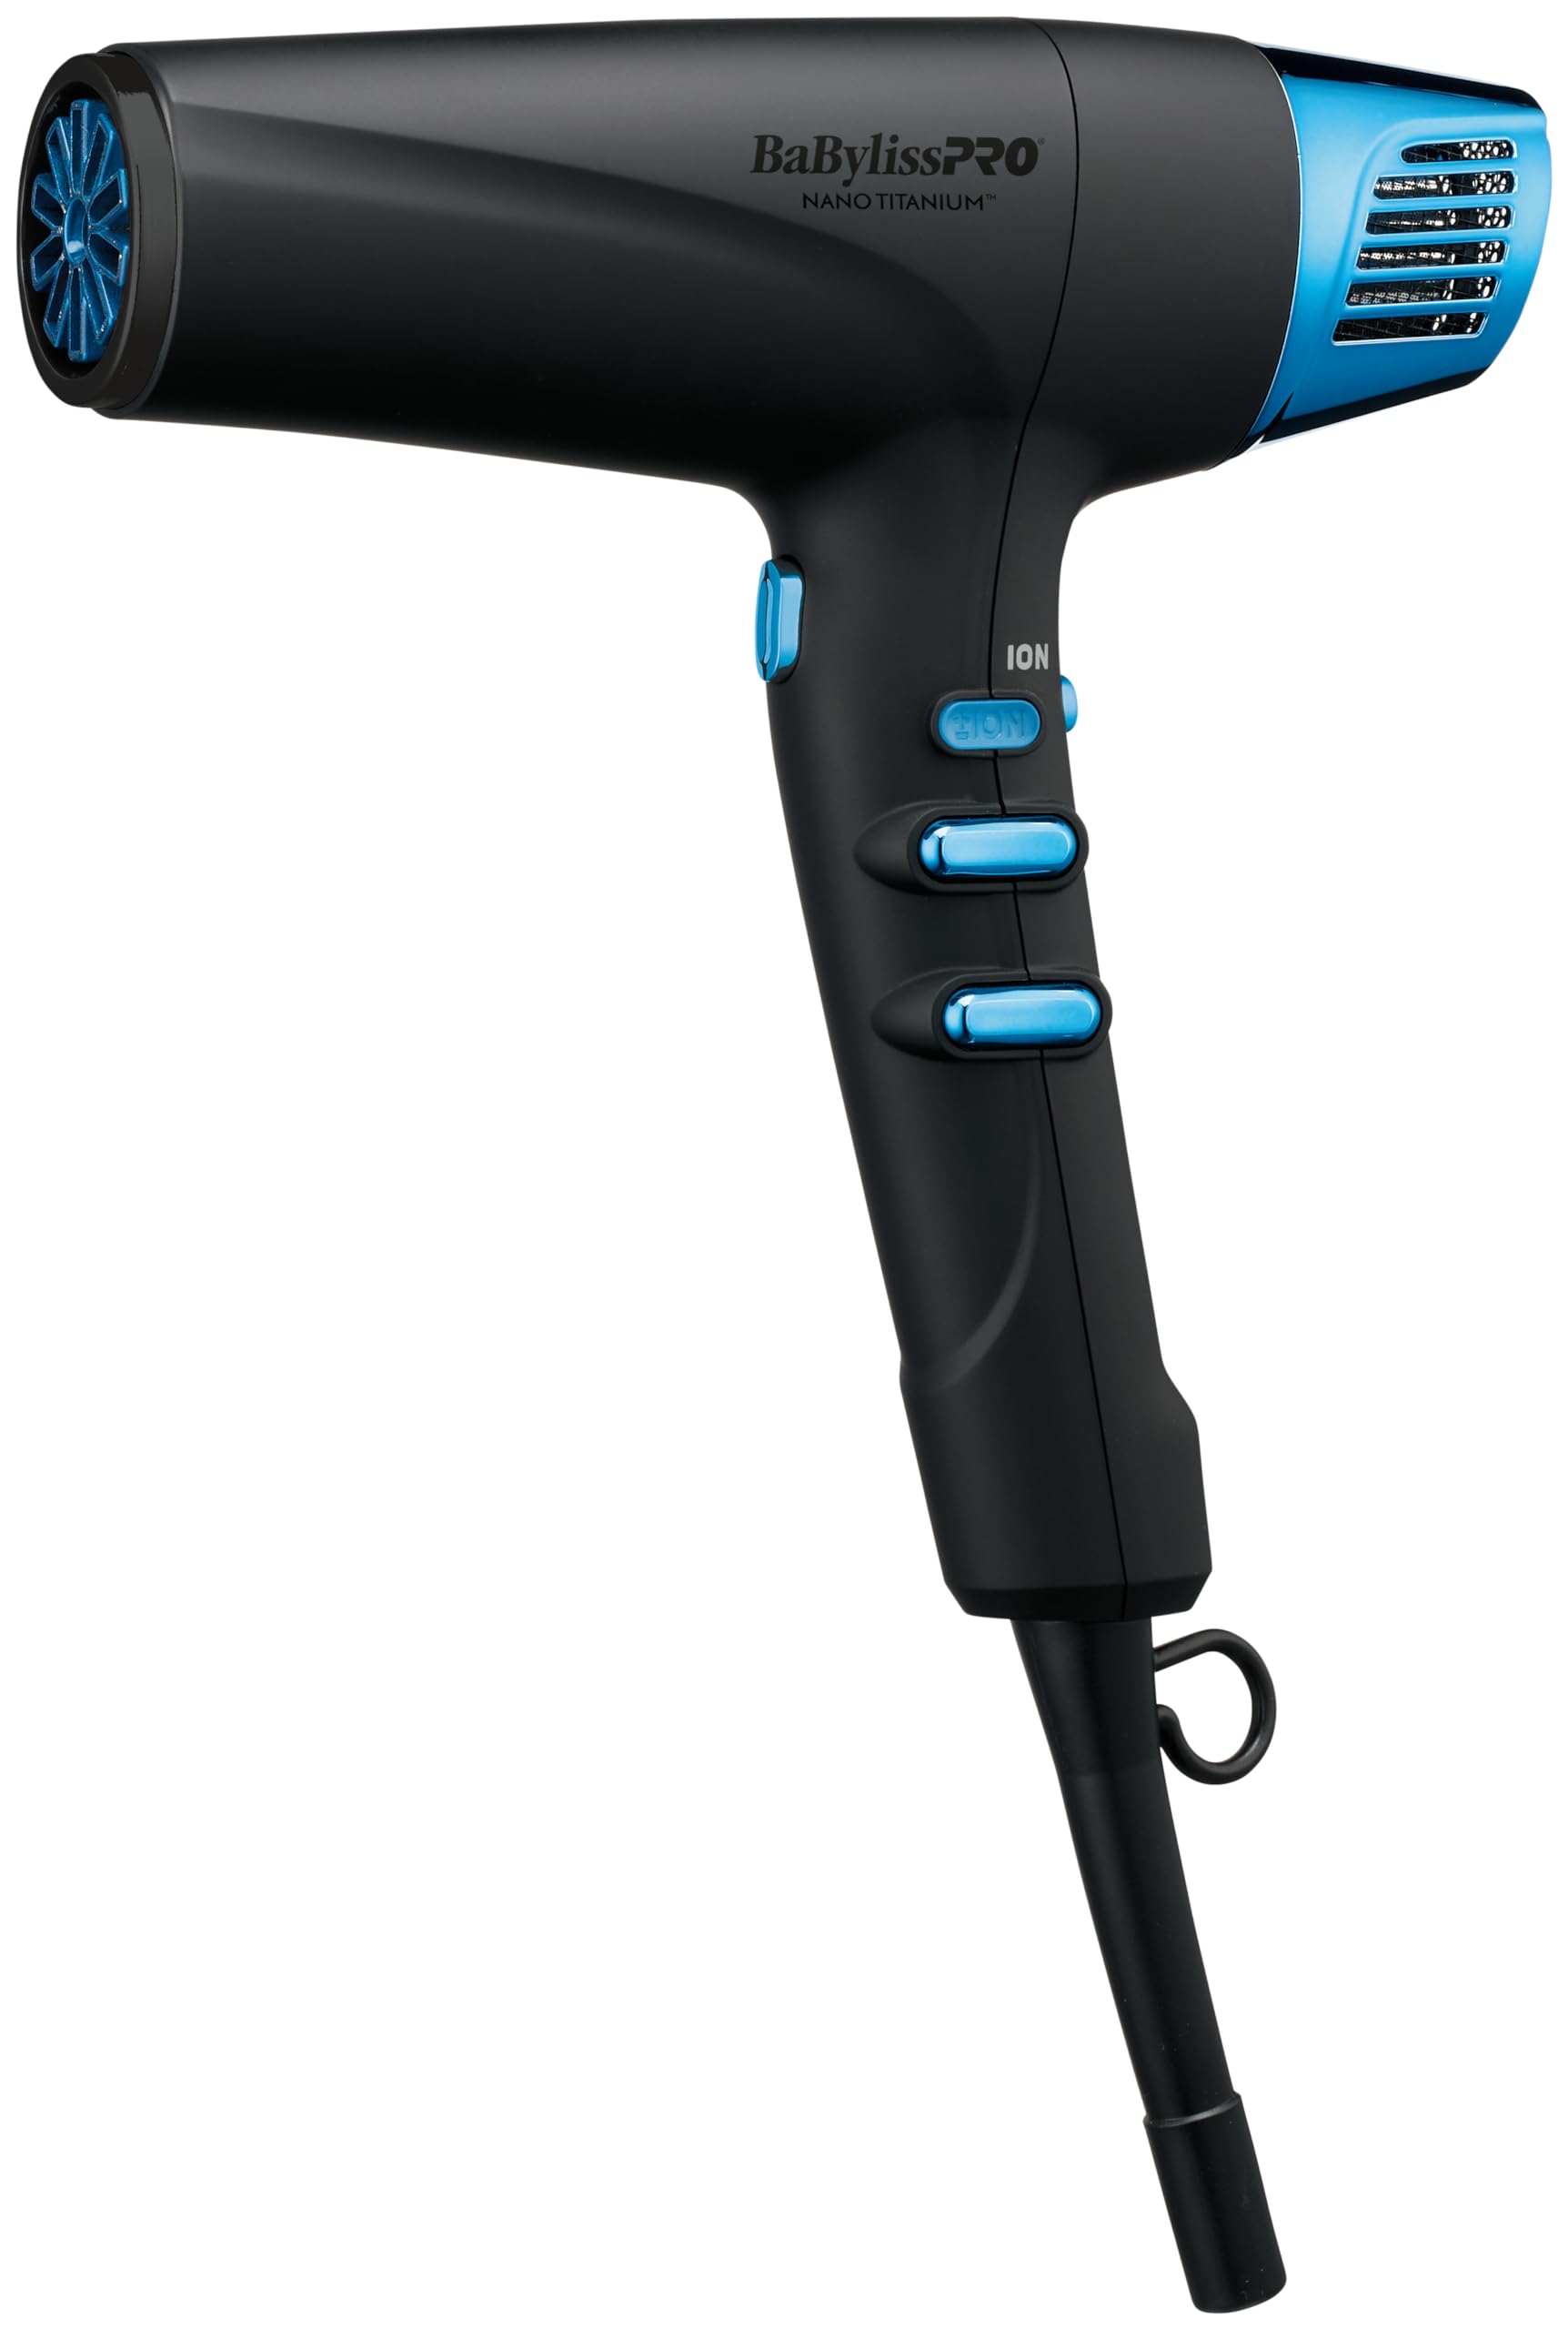 BaBylissPRO Nano Titanium Hair Dryer, Professional 2000-Watt Blow Dryer, Ionic Technology Dries Hair Faster With Less Frizz